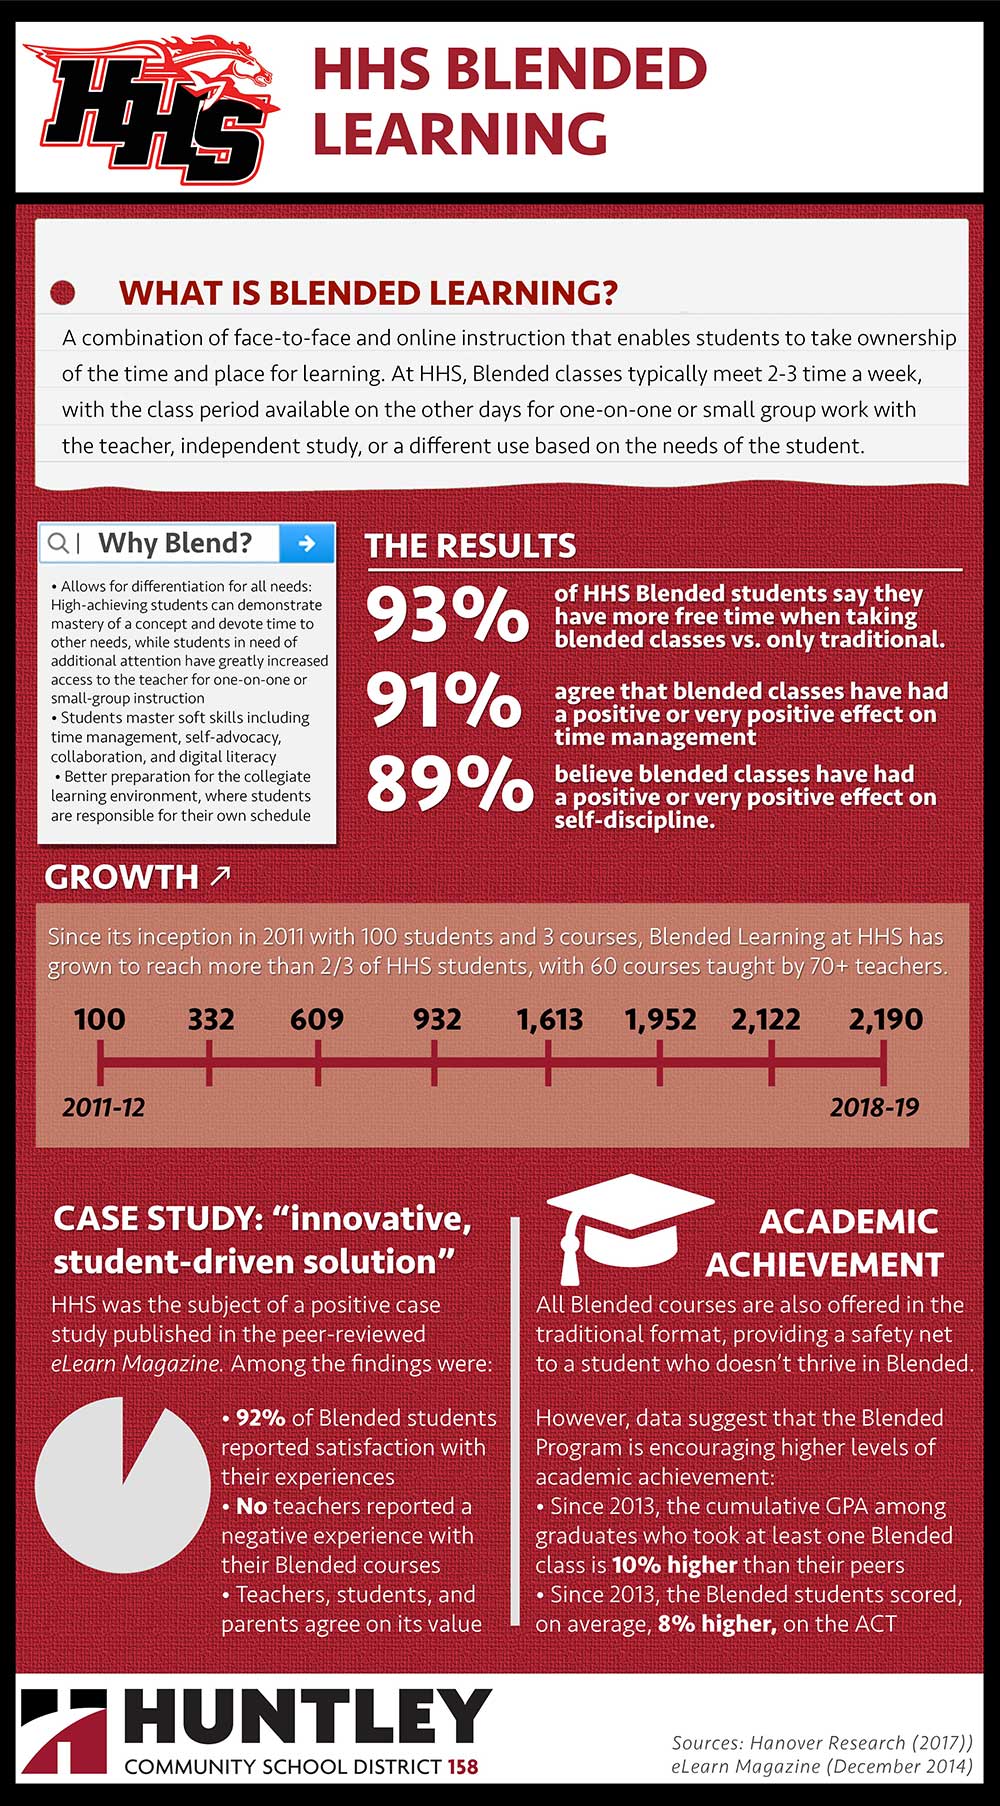 HHS Blended Learning Infographic